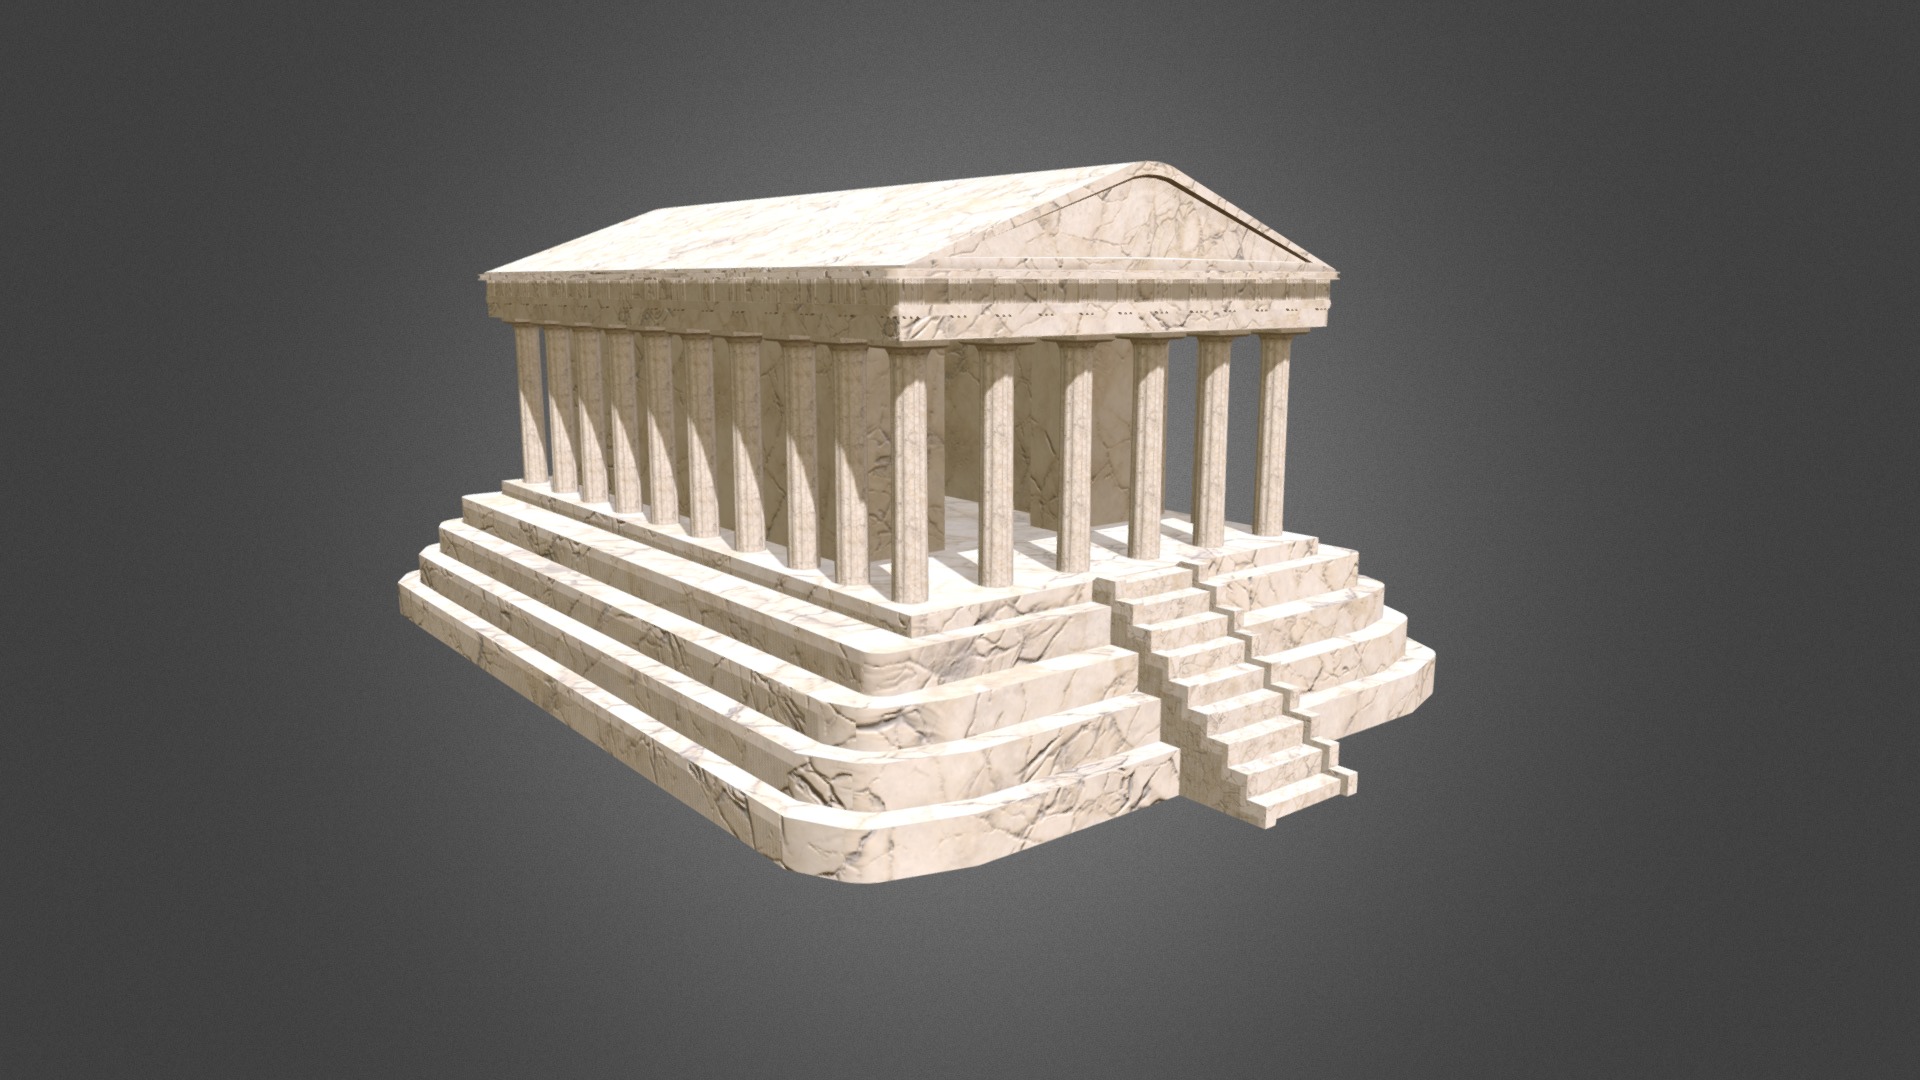 This temple model is based on temples built in ancient Greece.

Modeled in Maya and textured in Substance Painter - Greek Temple - 3D model by Myles3D 3d model